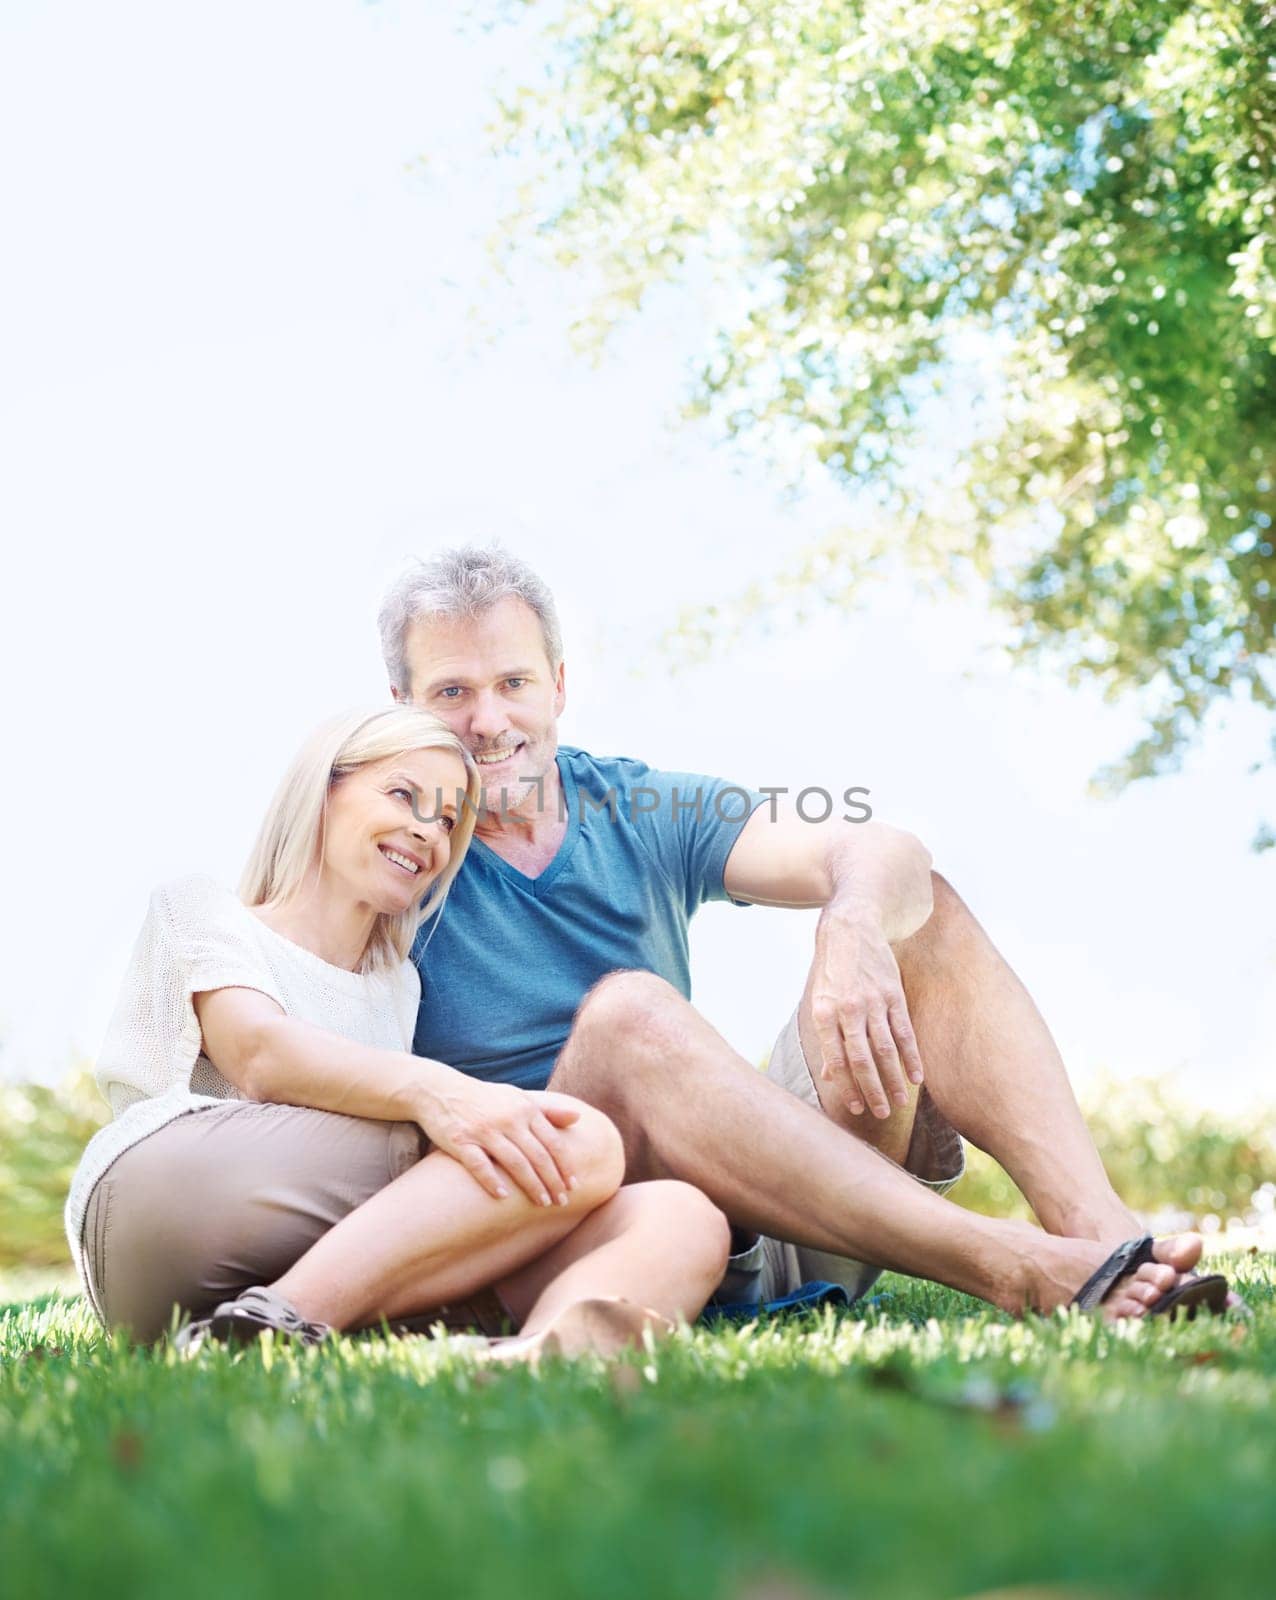 Happy, relax and senior couple in park for bonding, relationship and commitment outdoors on weekend. Portrait, retirement and mature man and woman embrace for romance, love and marriage in nature.